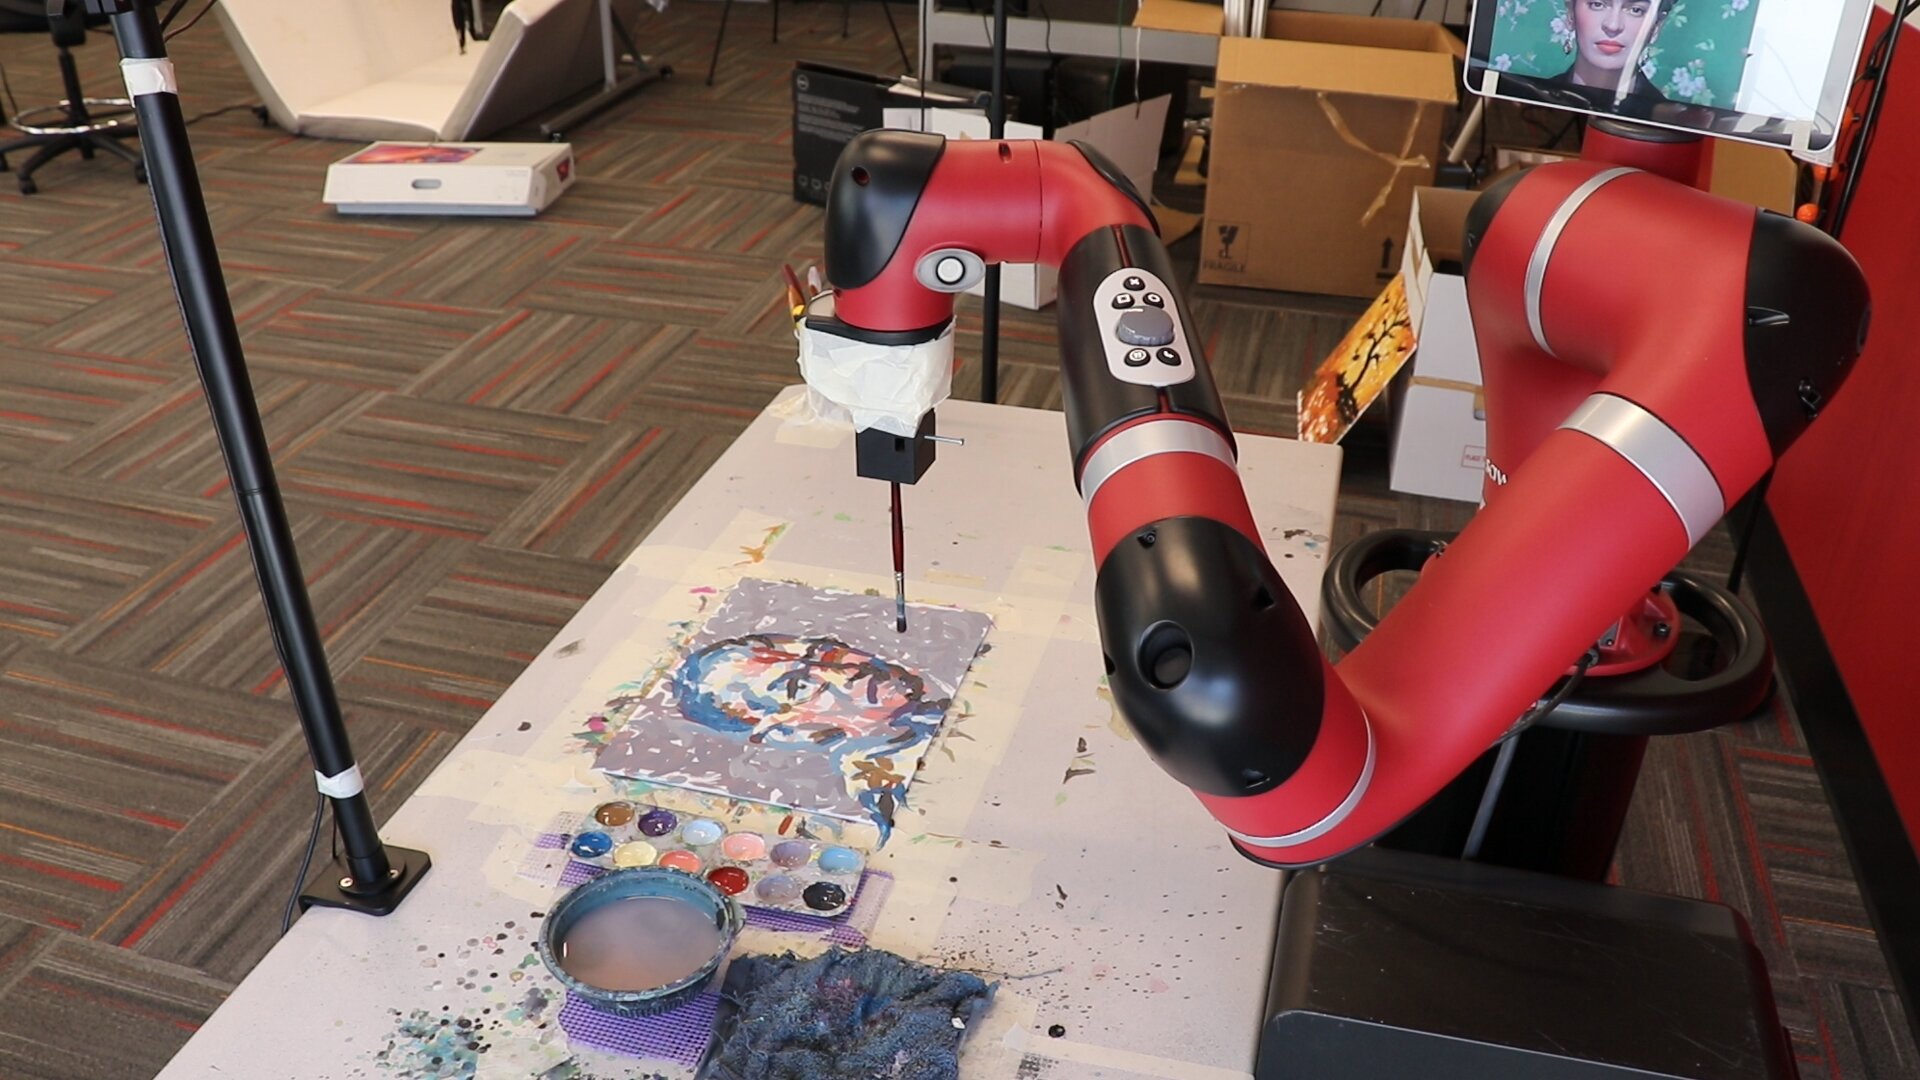 AI-Powered FRIDA robot collaborates with humans to create art